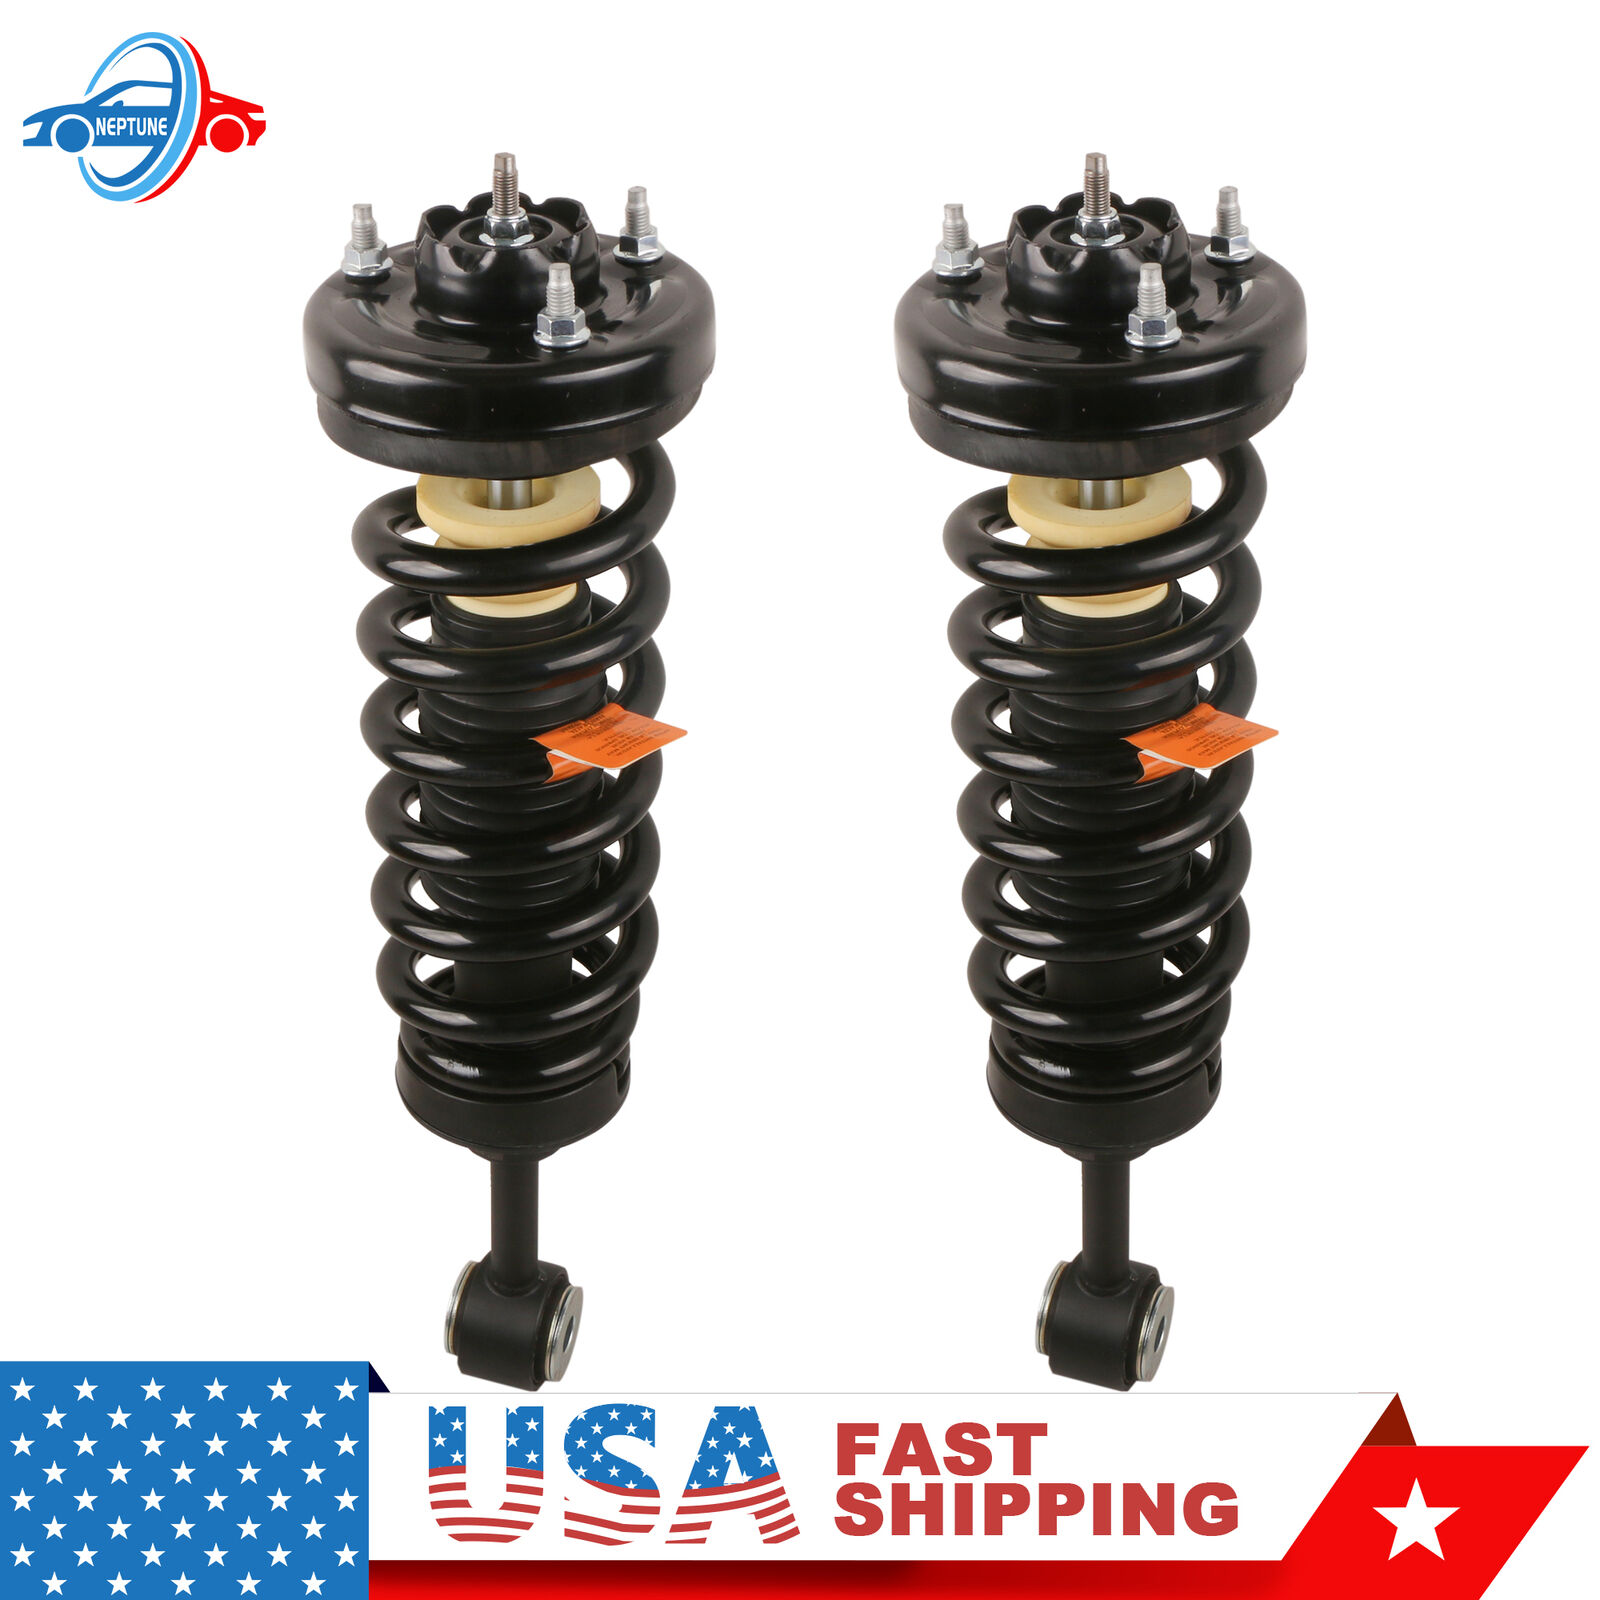 2PCS Front Struts Shocks Absorbers For 2003-06 Ford Expedition Lincoln Navigator